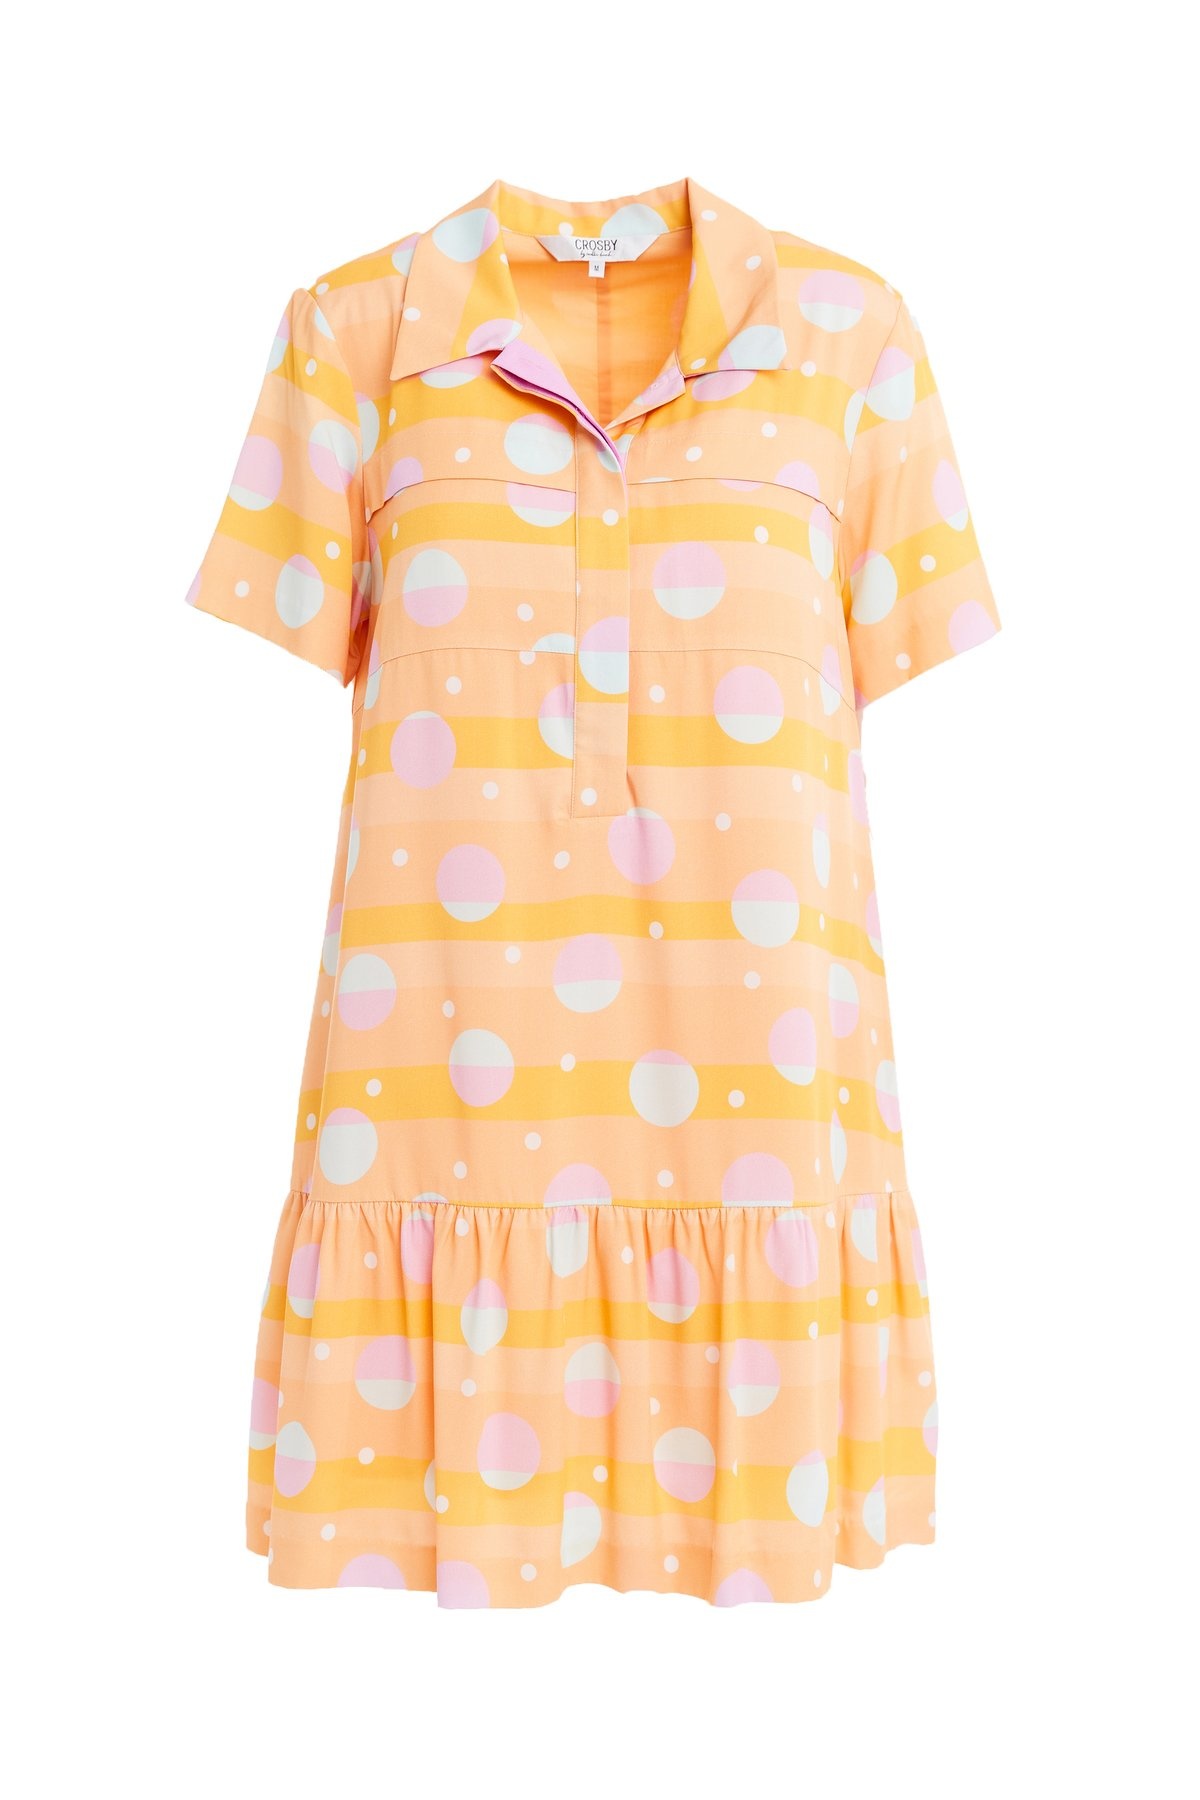 Crosby By Mollie Burch Calee Dress in African Sunset